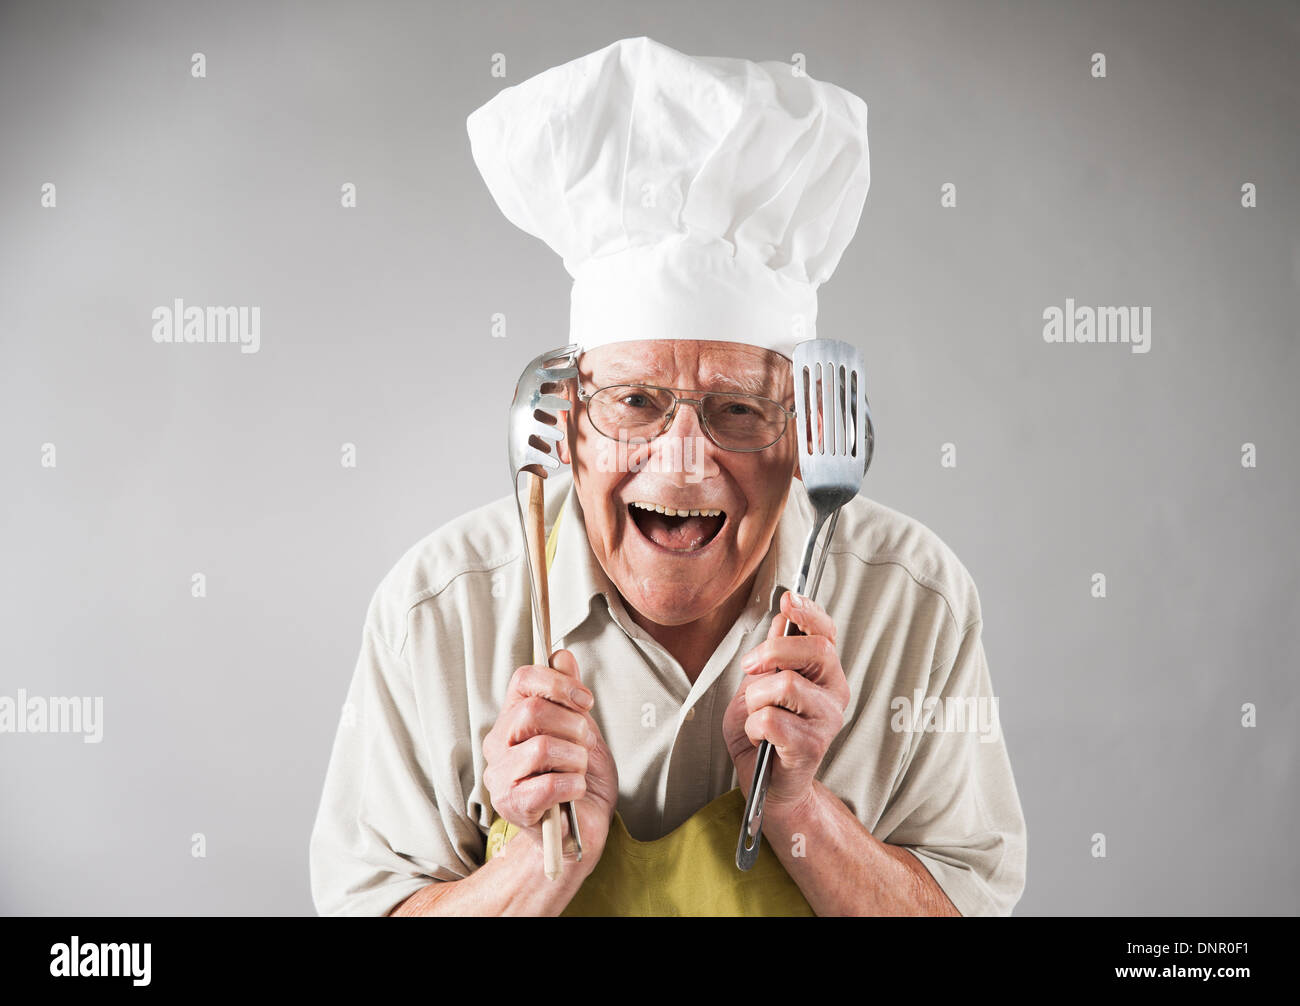 Senior Man with Cooking Utensils wearing Apron and Chef's Hat, Studio Shot Stock Photo